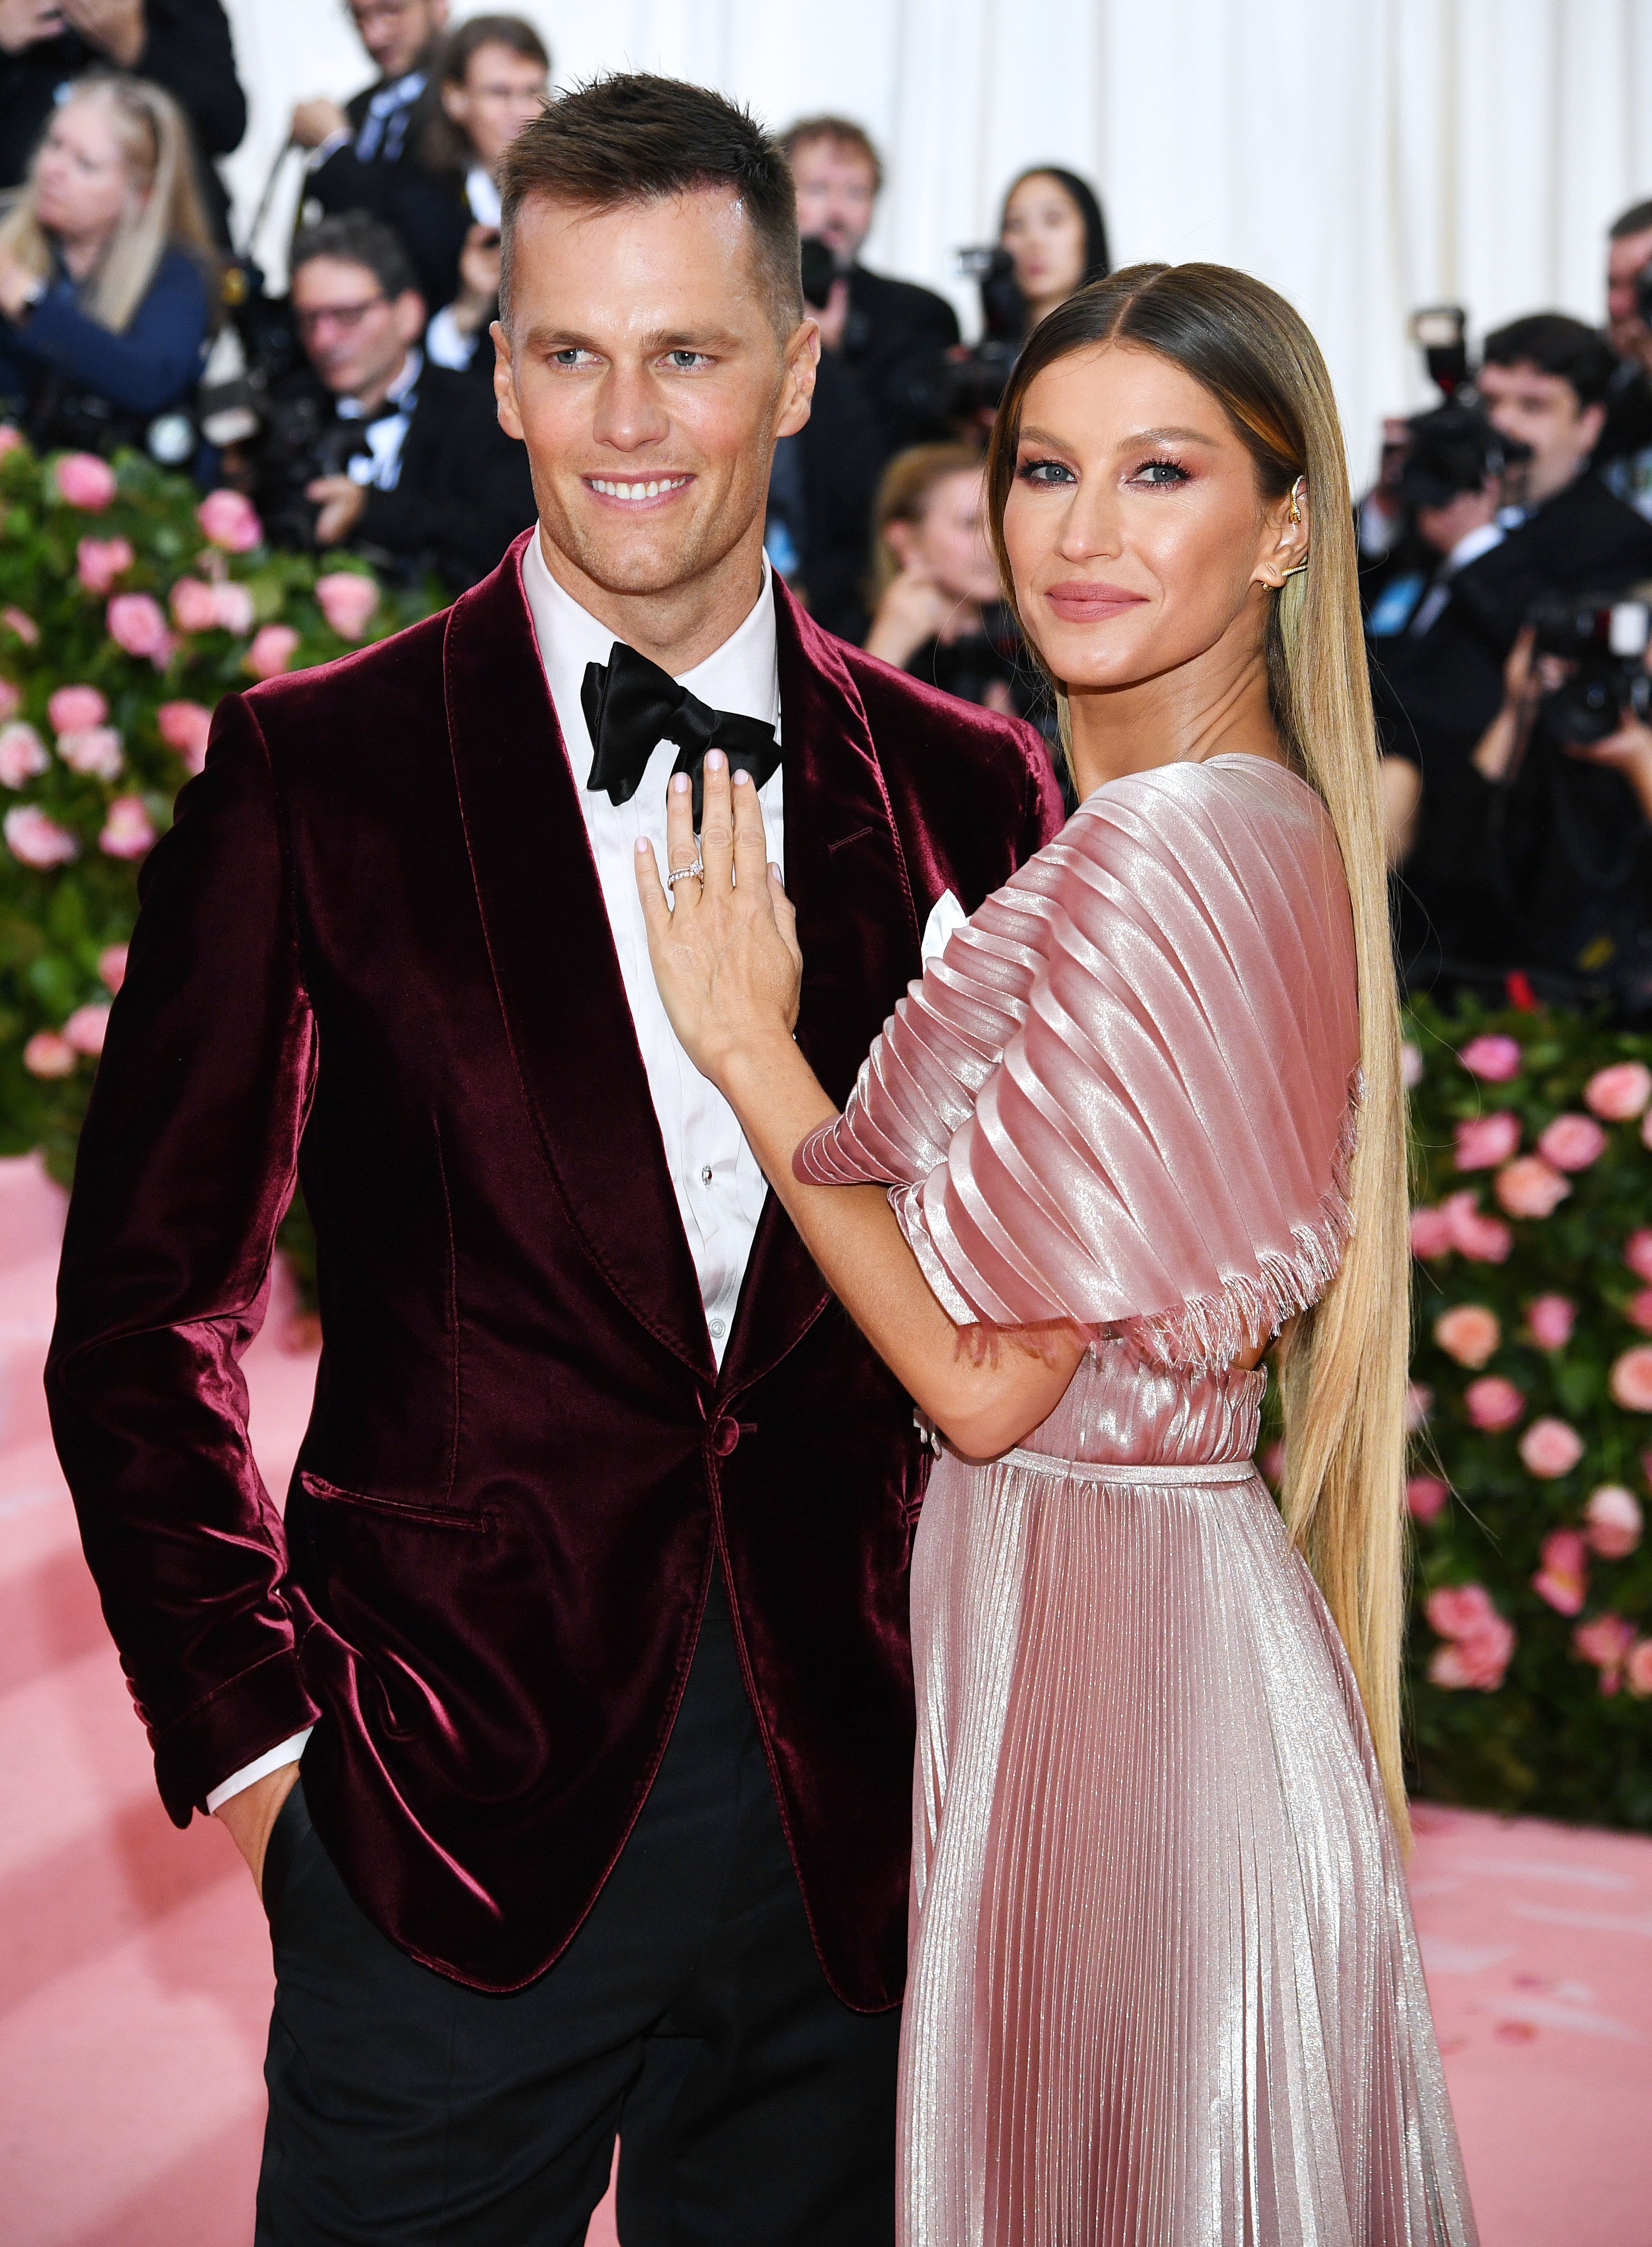 Gisele Bündchen and Tom Brady attend The 2019 Met Gala Celebrating Camp: Notes on Fashion on May 06, 2019, in New York City. | Source: Getty Images.